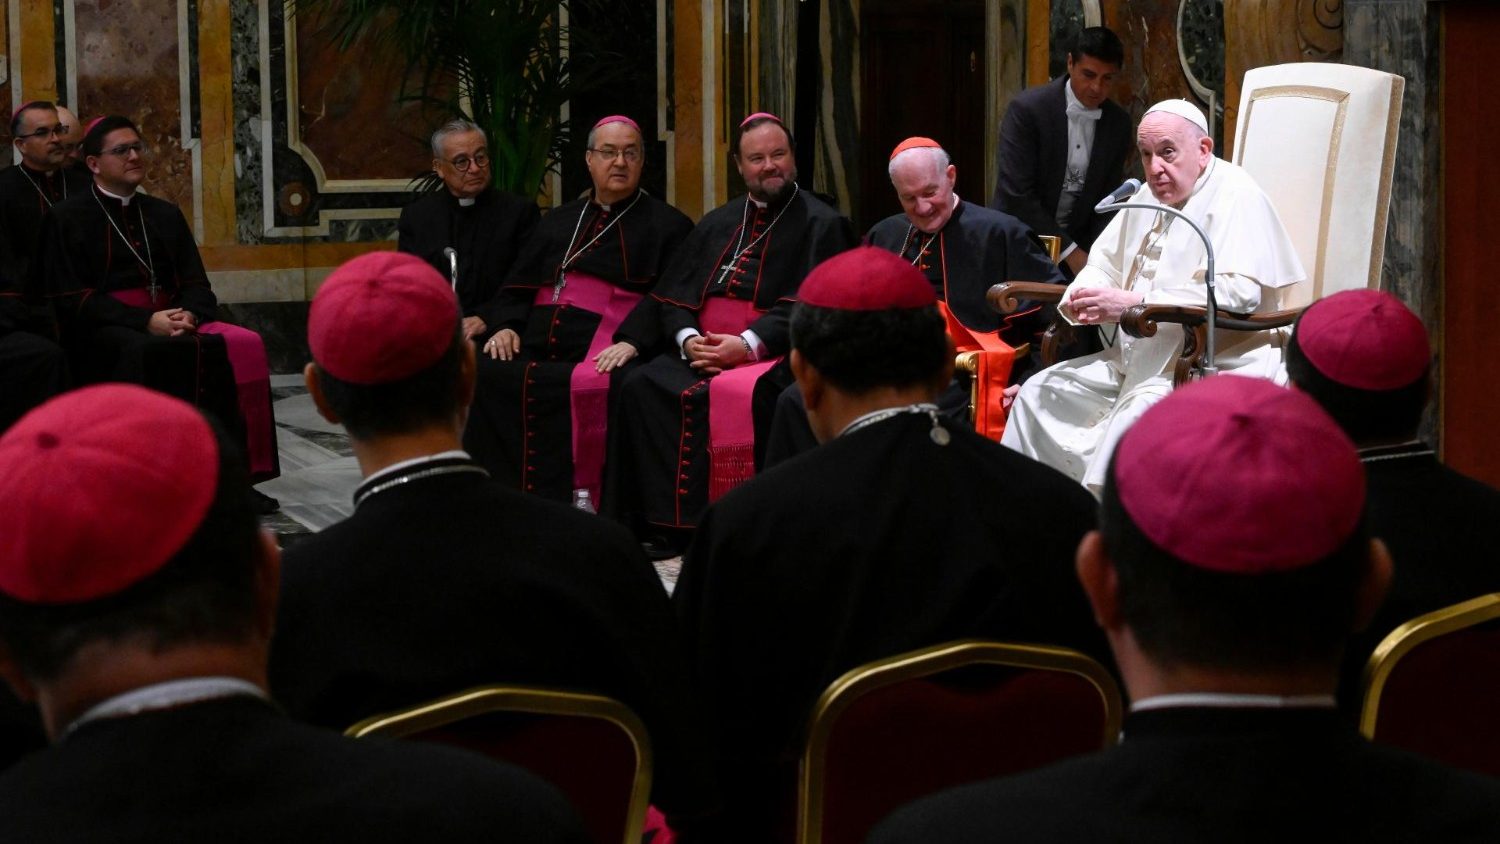 Vatican Holds Formation Course for New Bishops, by Gaudium Press English  Edition